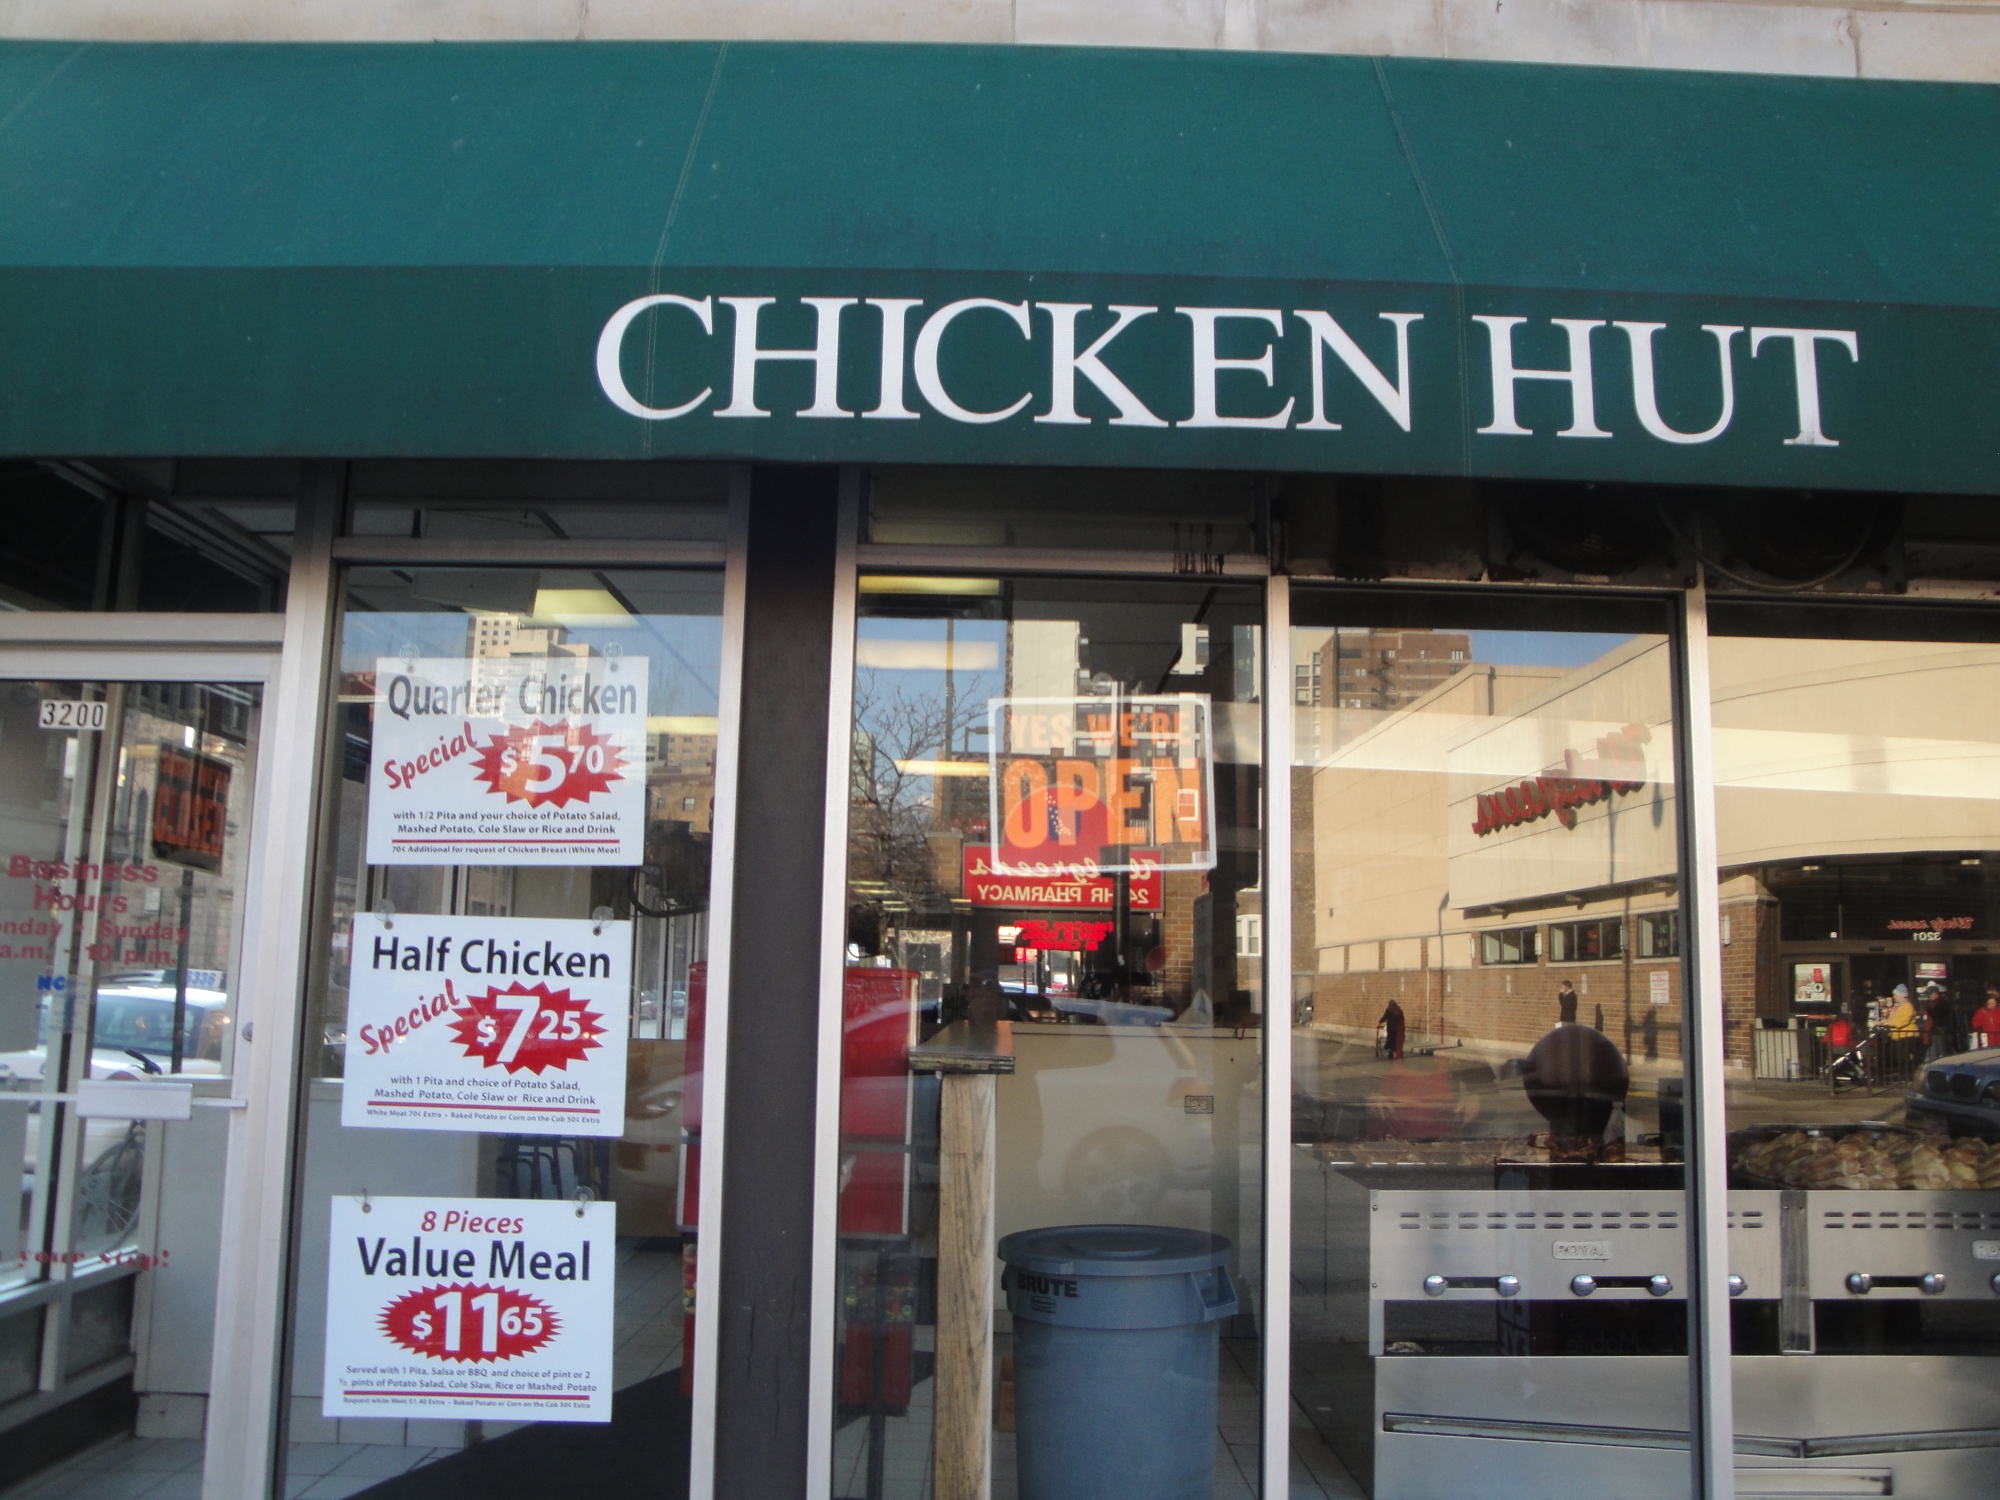 Chicken Hut – Possibly the best grilled chicken in town…discuss – The